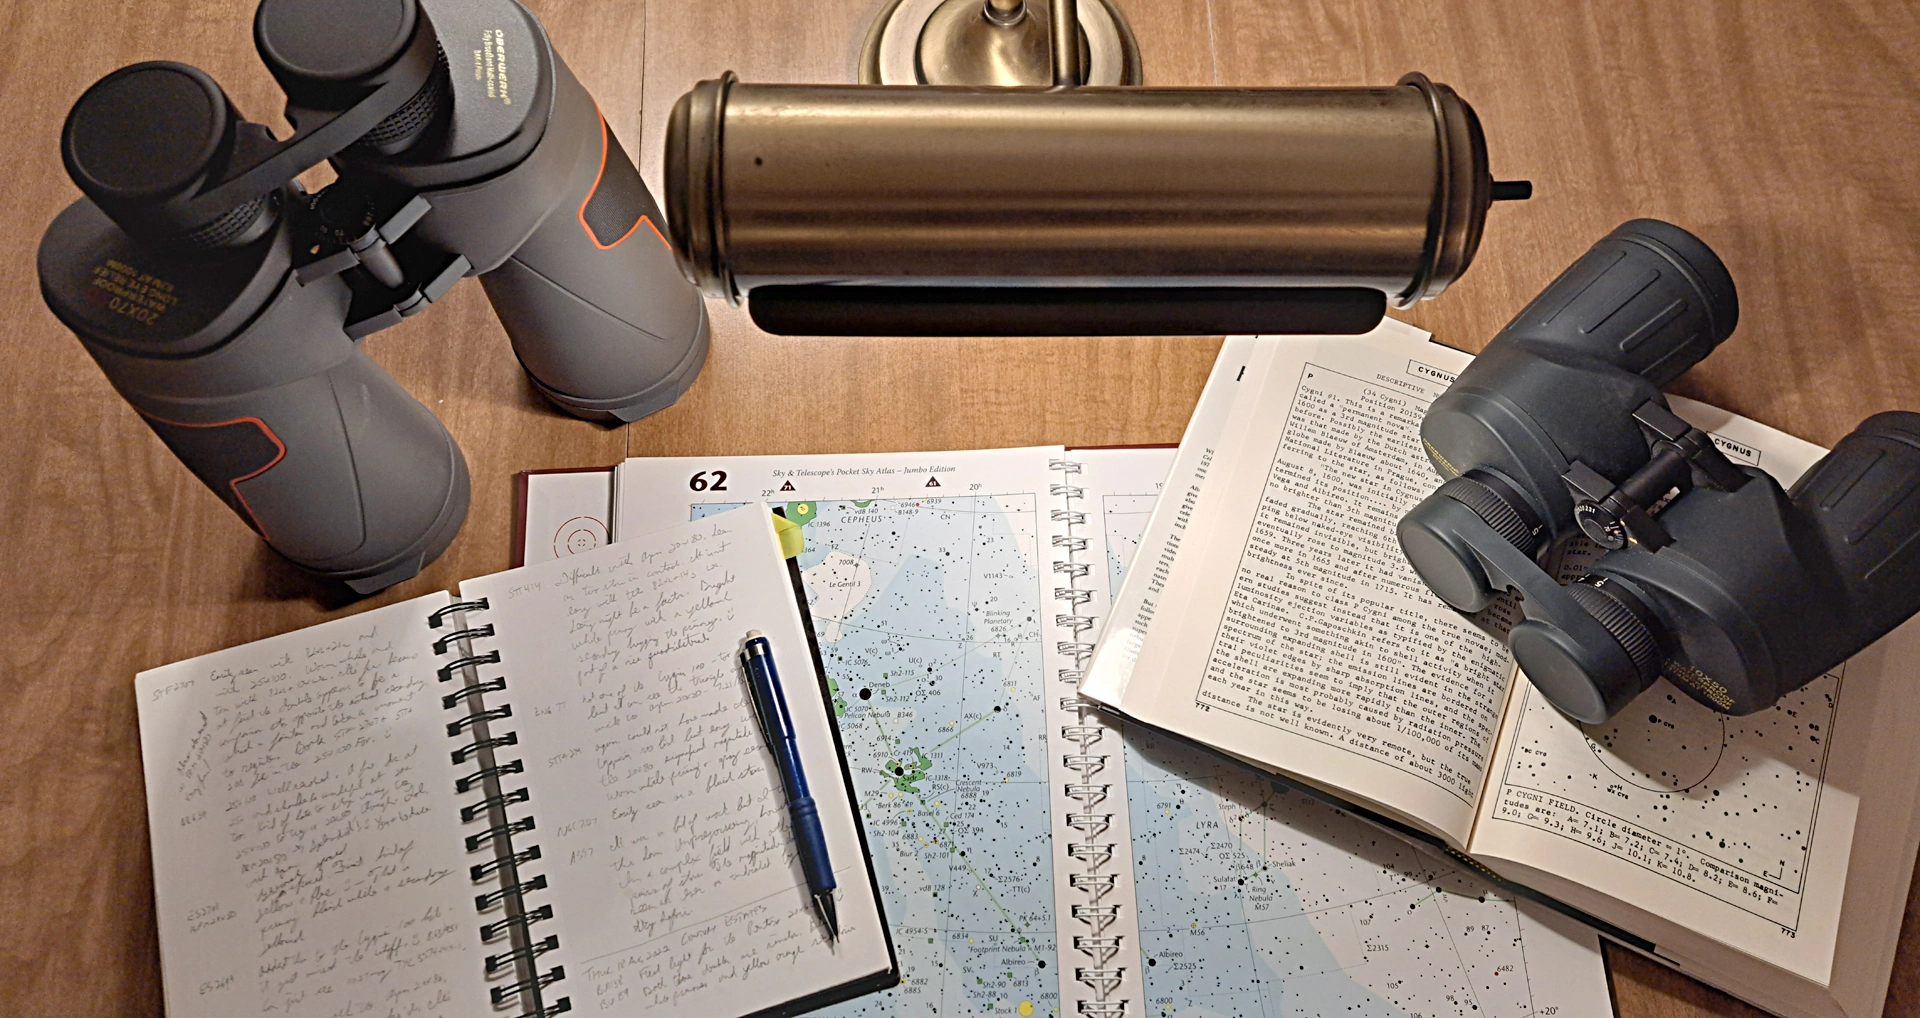 Astronomy journal, star atlas, reference book, and binoculars.